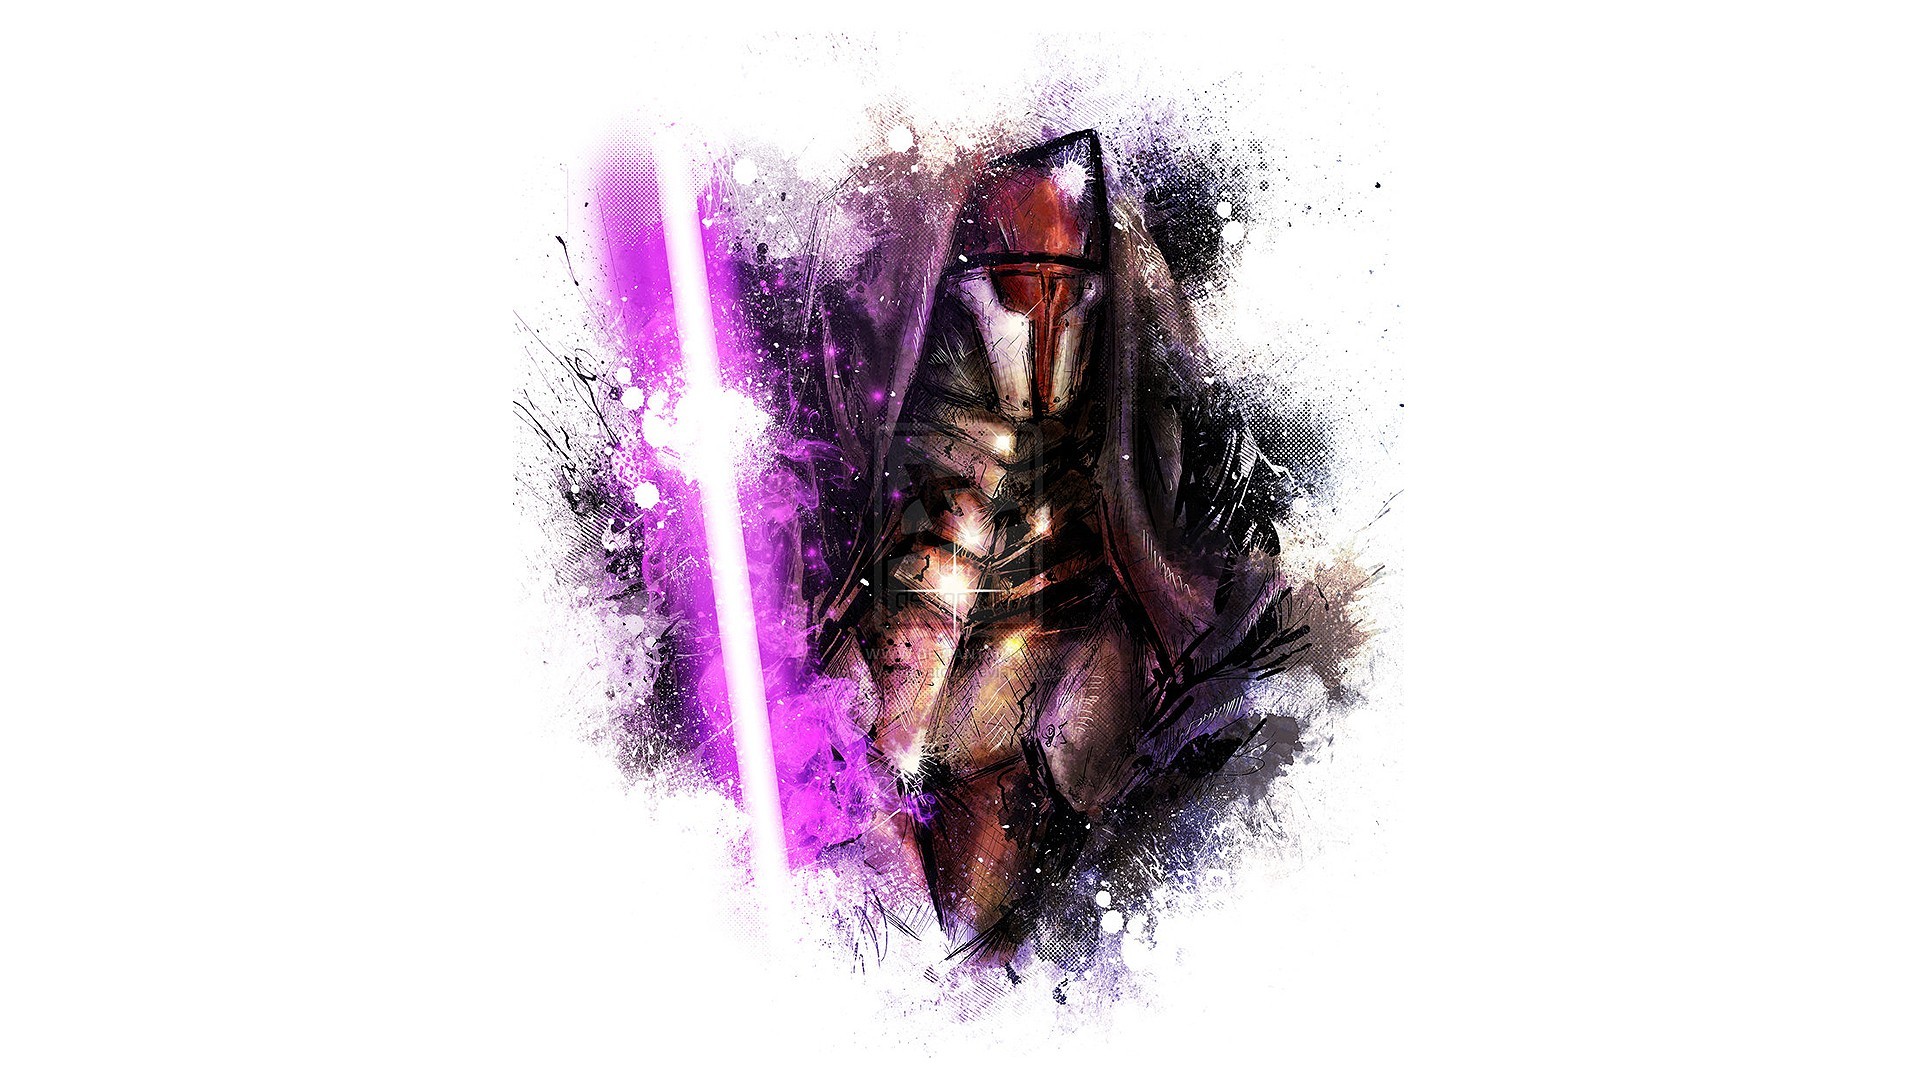 Star Wars Star Wars Knights Of The Old Republic Revan Star Wars The Old Republic Darth Revan 1920x1080